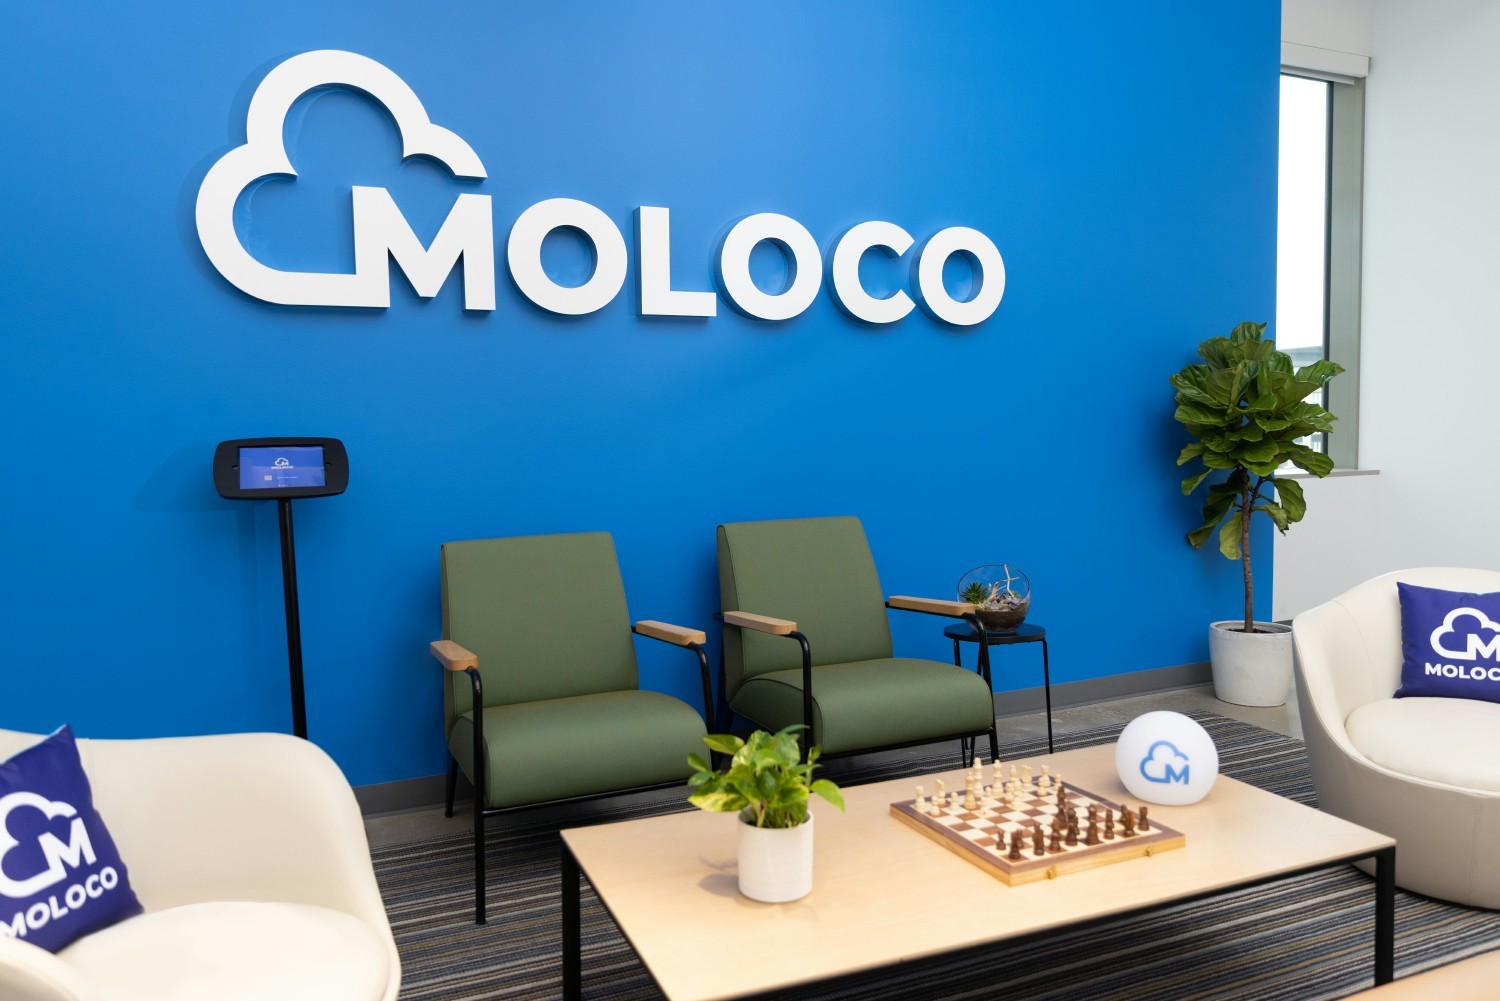 Our Moloco HQ office in Redwood City, CA